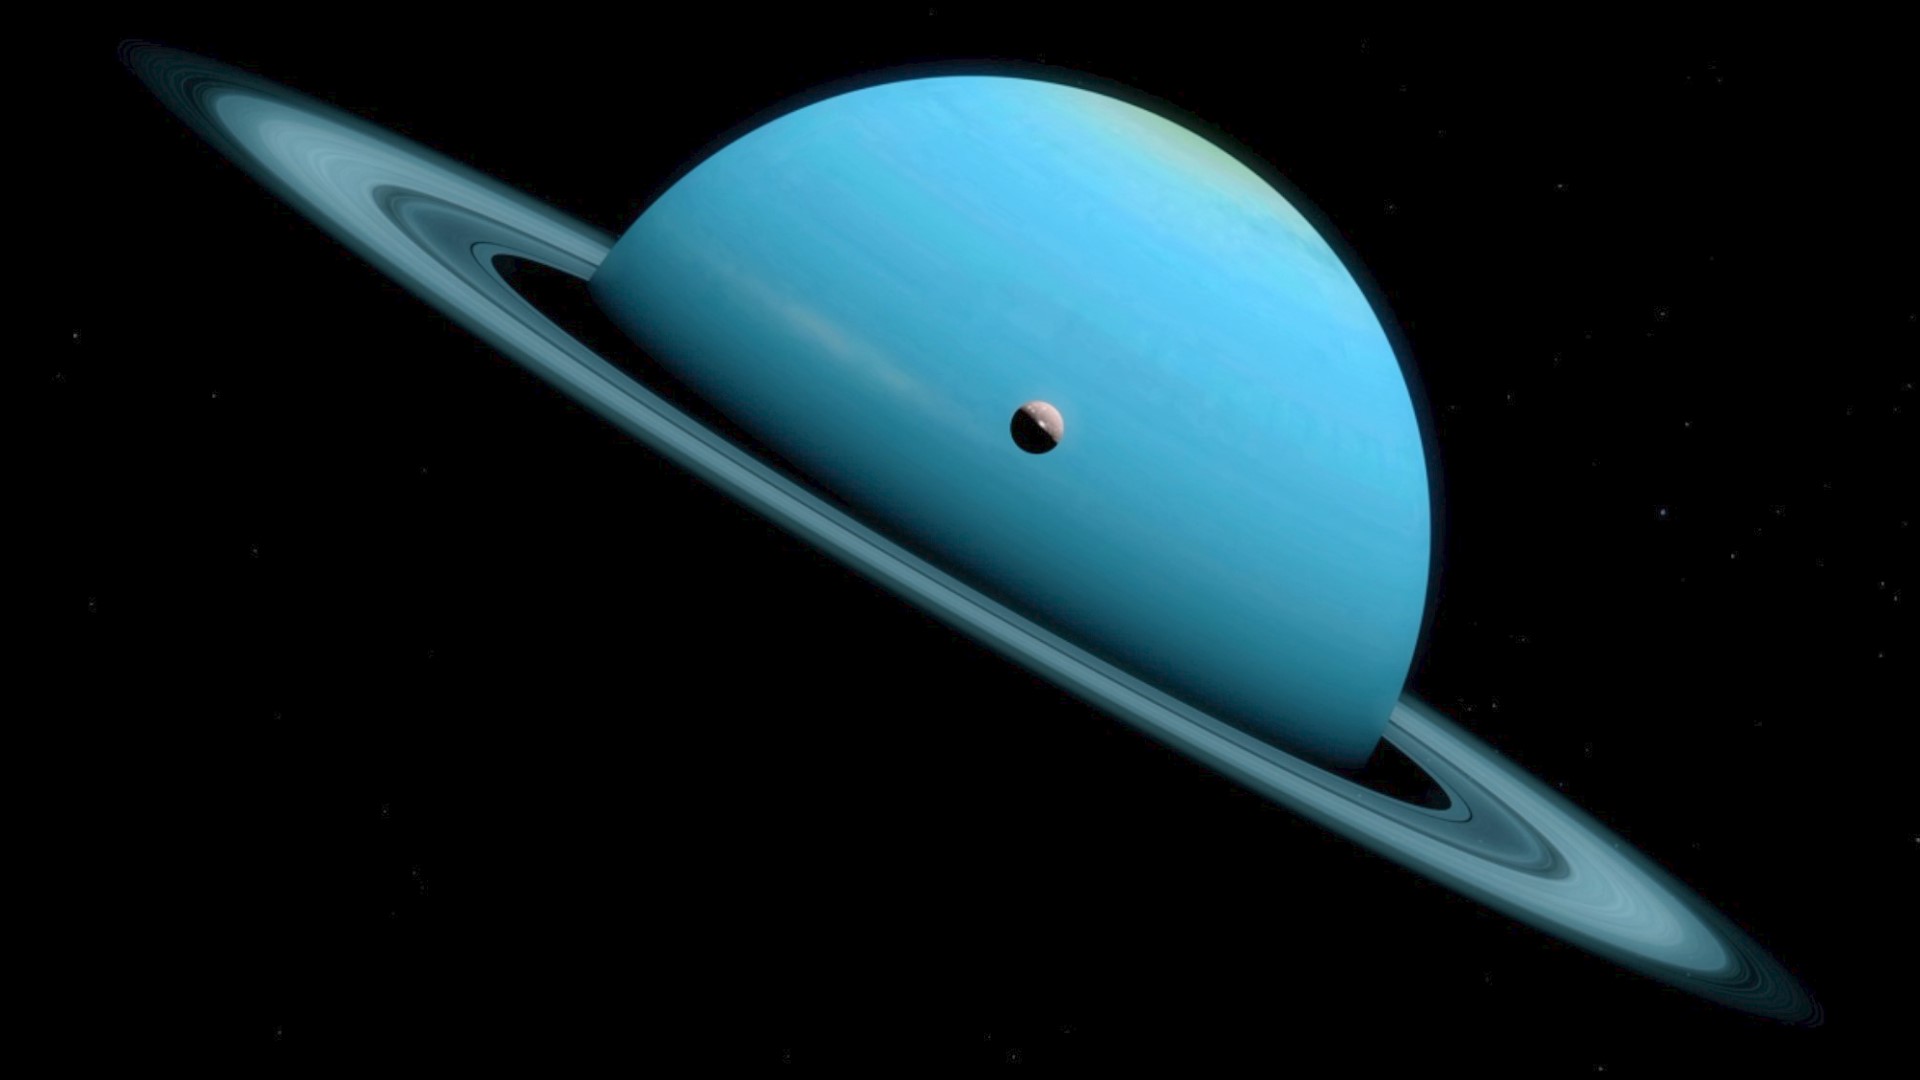 Are there secret oceans hiding under the surface of Uranus' moons?